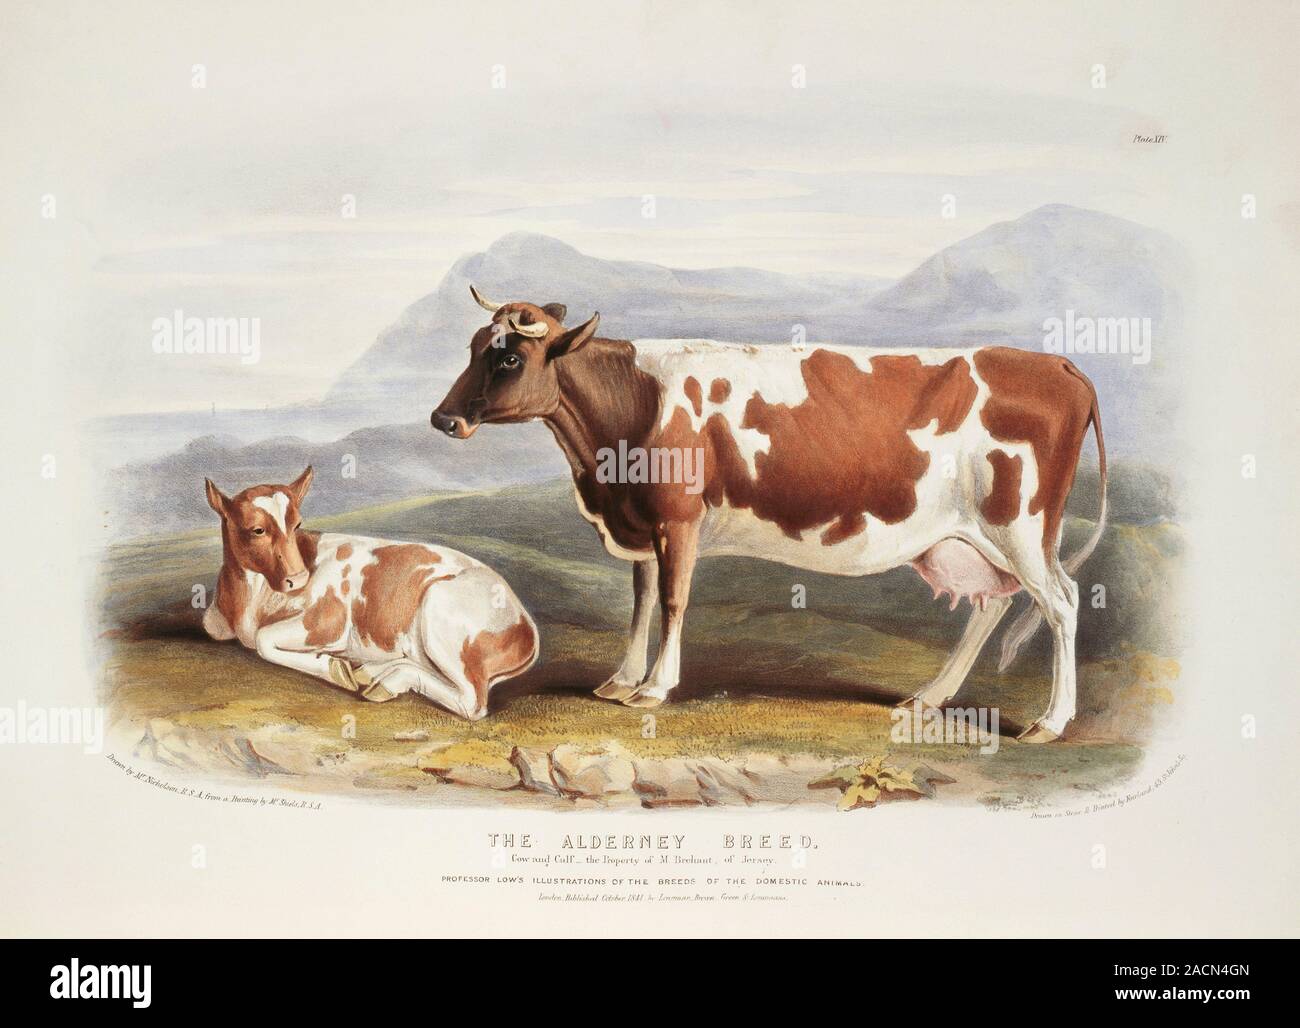 Alderney Cattle. 19th-century artwork of a cow and calf of the Alderney ...